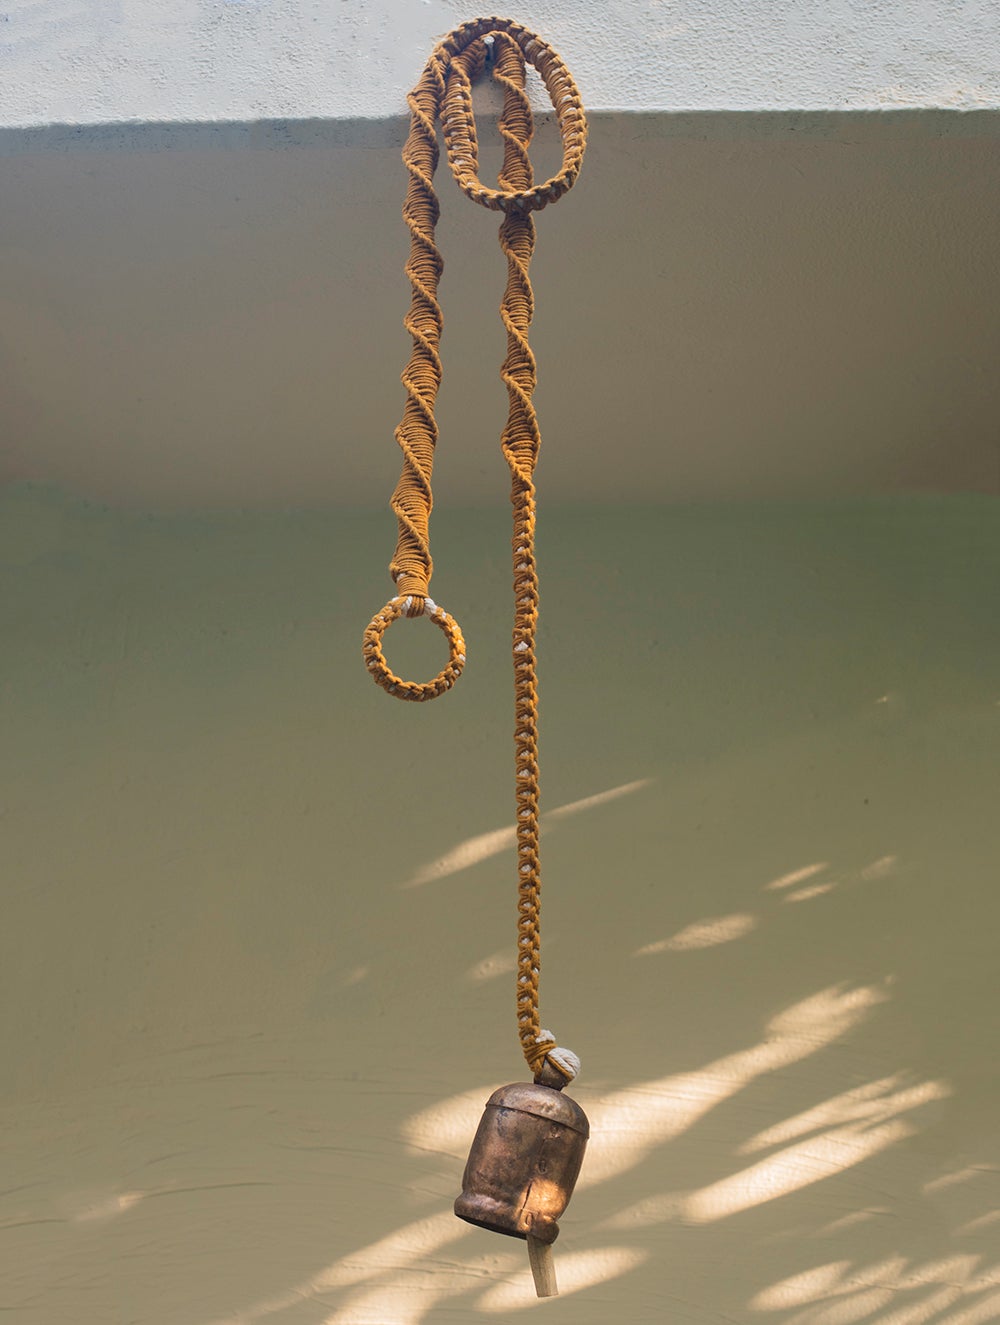 Load image into Gallery viewer, Handknotted Macramé Hanging Copper Bells 3.5&quot; - Mustard (80&quot;)